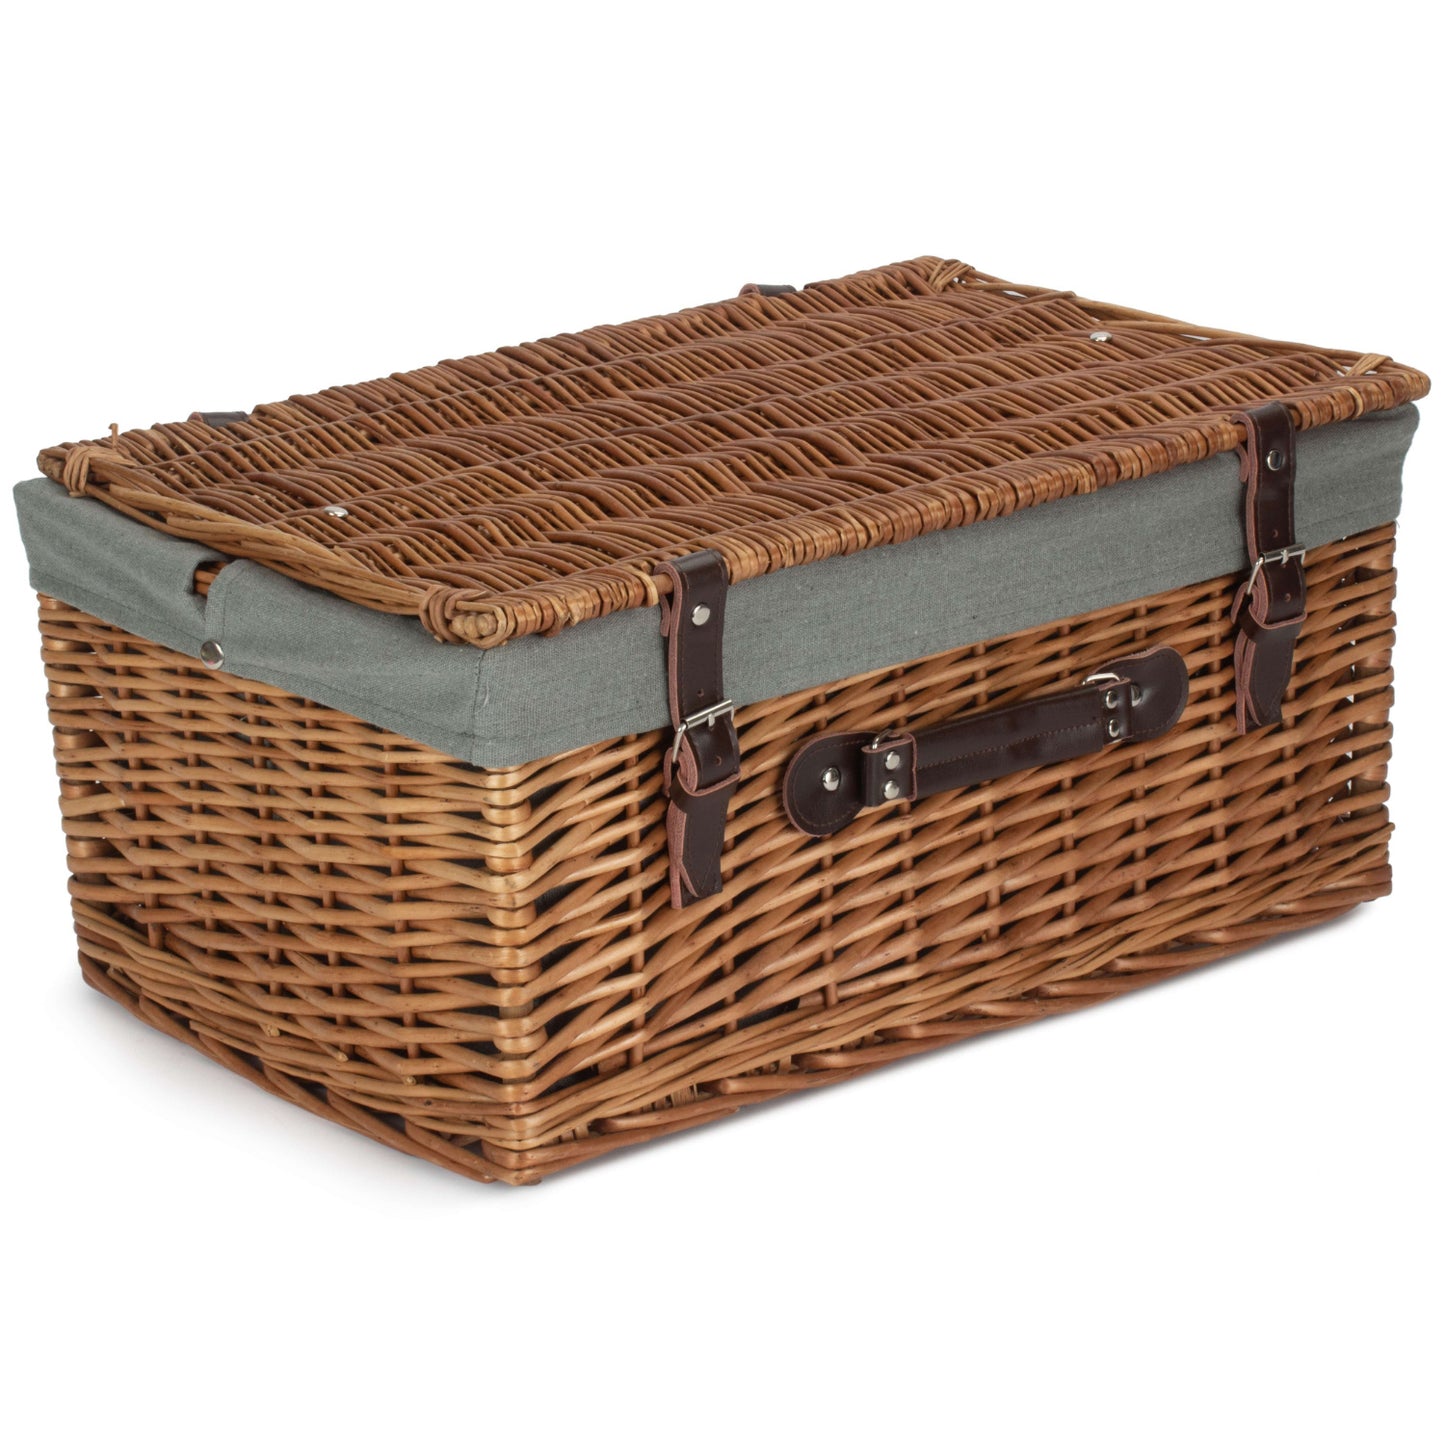 20 Inch Double Steamed Hamper With Grey Sage Lining